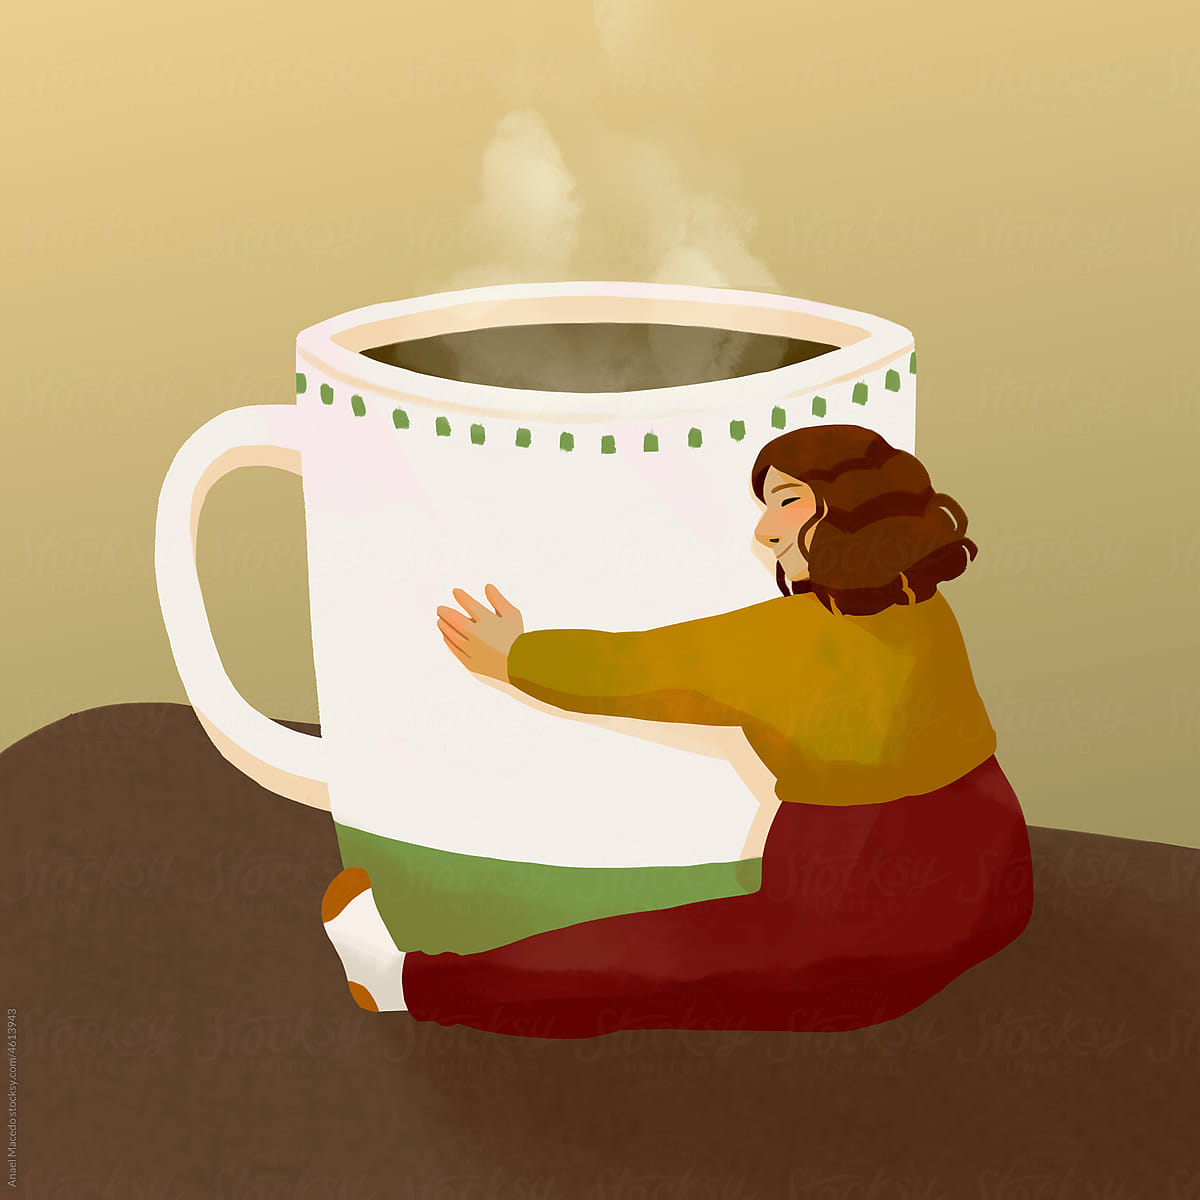 Hugging a hot drink cup